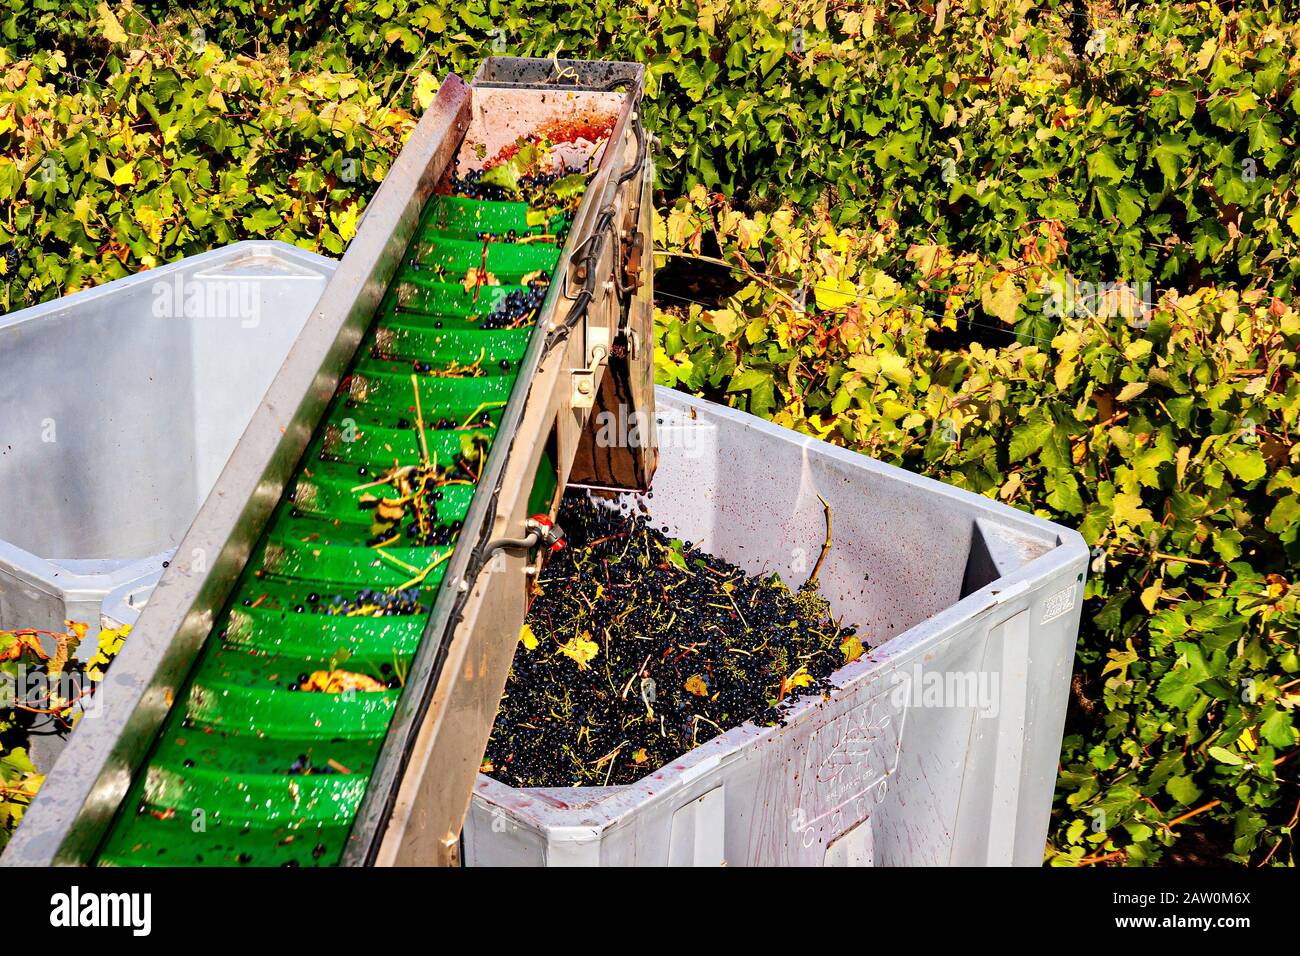 Australian wine makers and breweries. Production in South/Western Australia and New South Wales wine regions. Conveyor belt loads grapes into bin Stock Photo